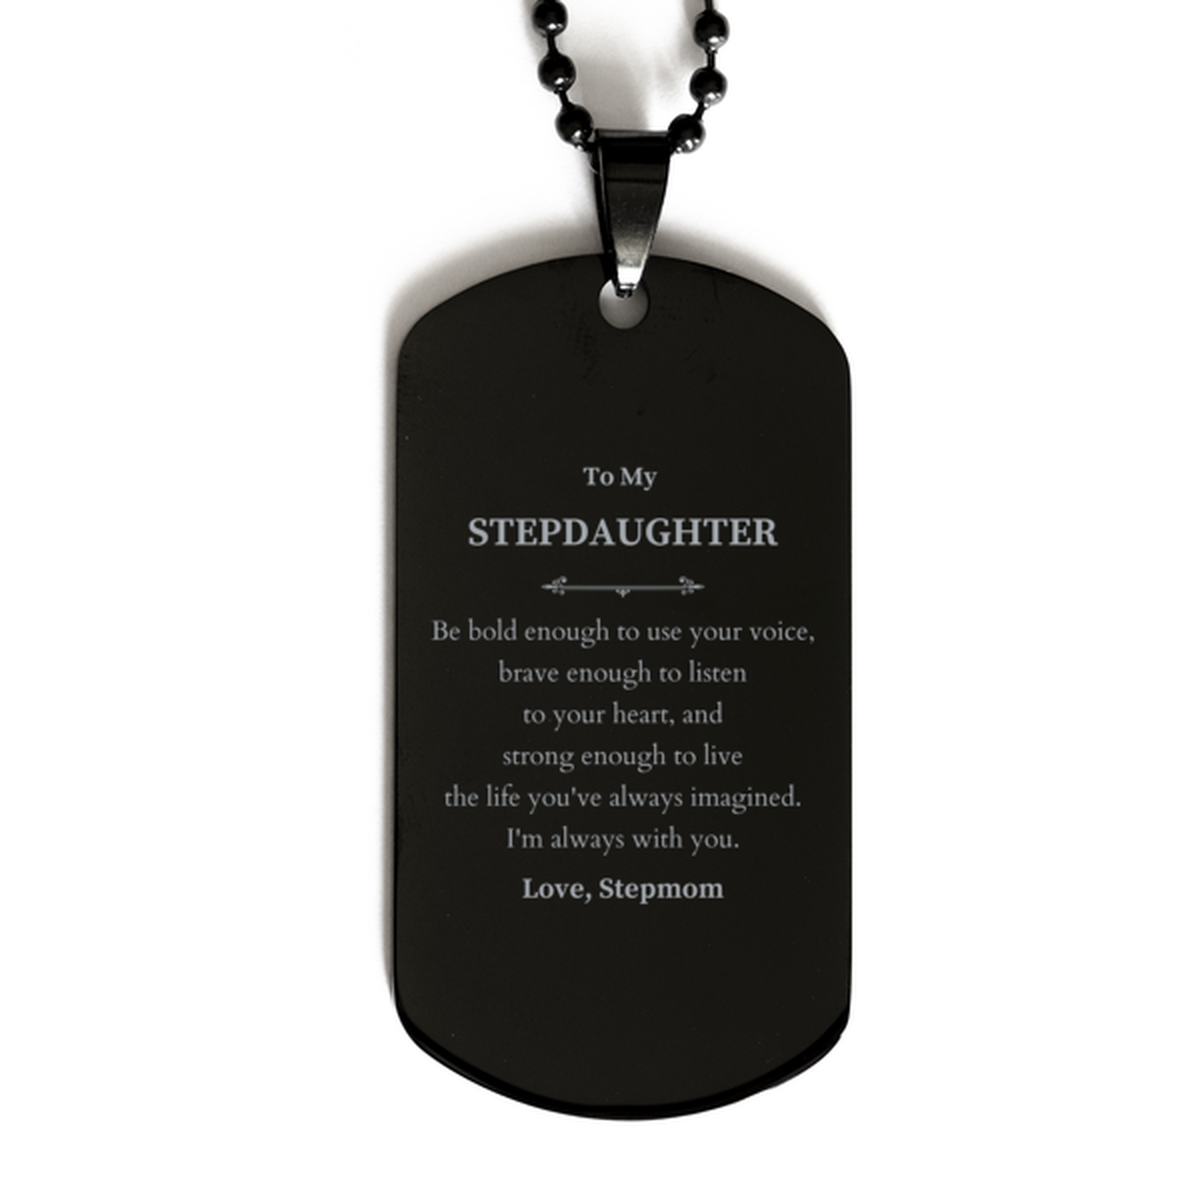 Keepsake Stepdaughter Black Dog Tag Gift Idea Graduation Christmas Birthday Stepdaughter from Stepmom, Stepdaughter Be bold enough to use your voice, brave enough to listen to your heart. Love, Stepmom